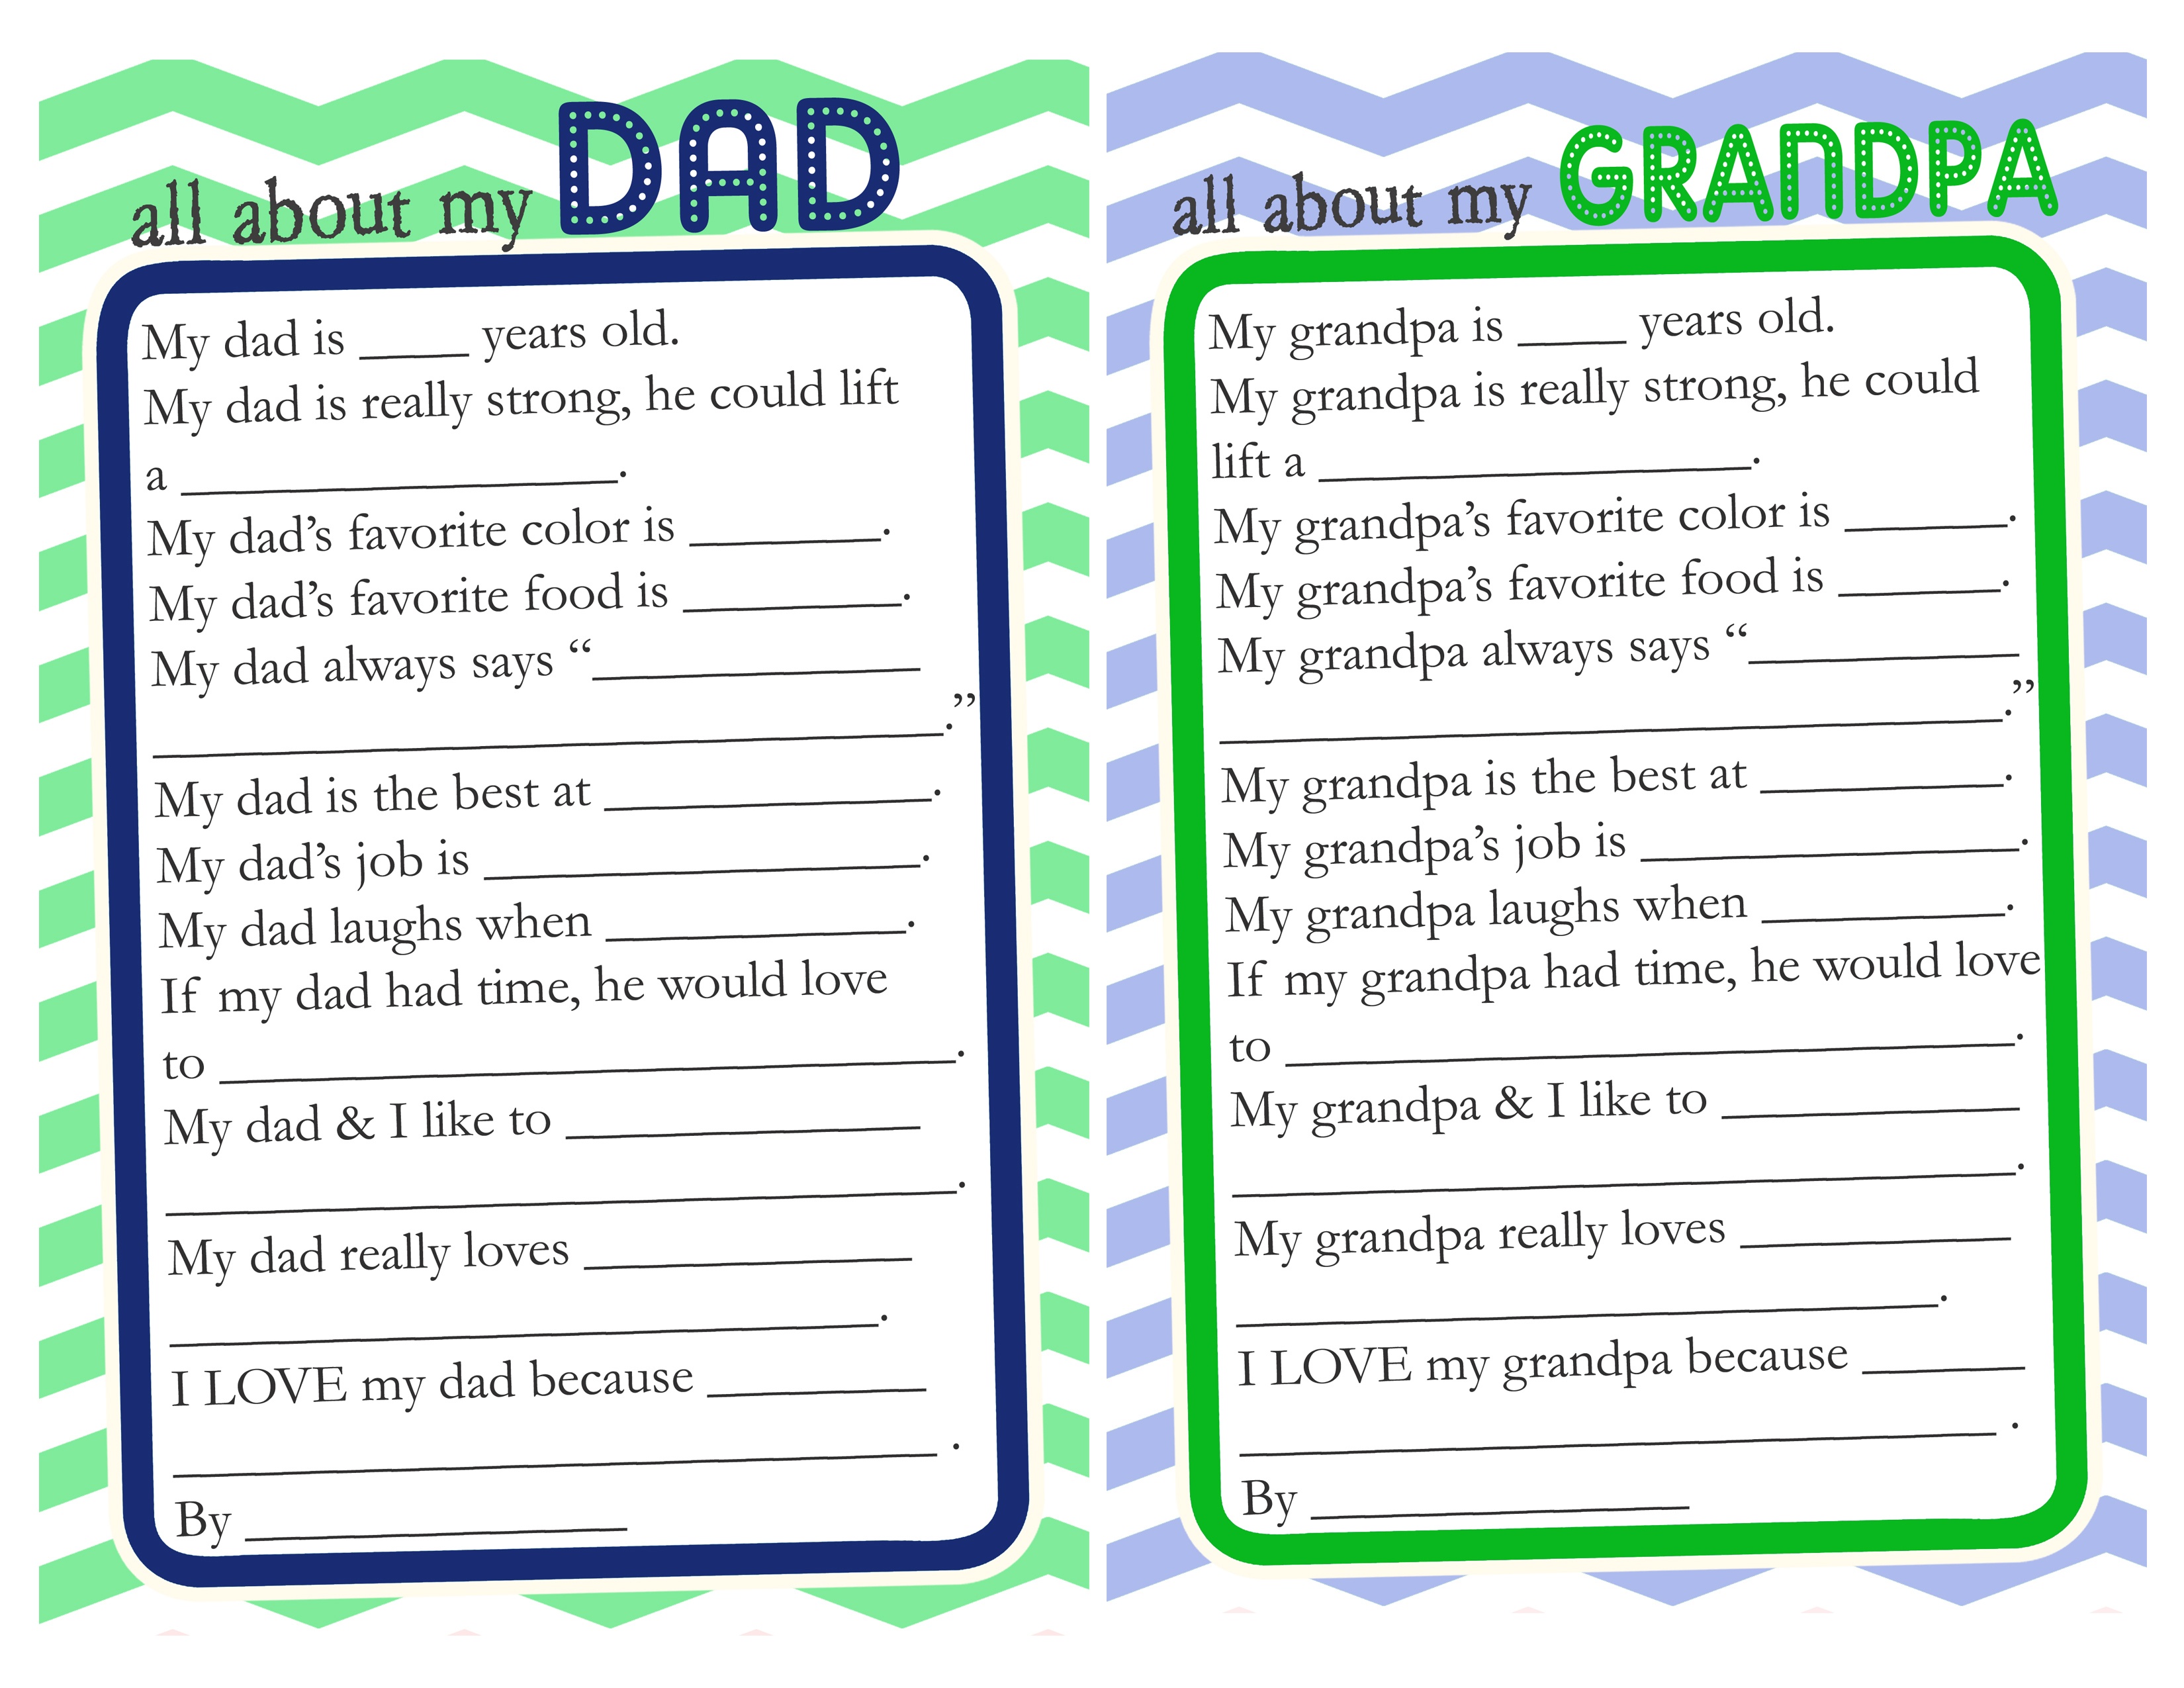 Father's Day Questionnaire &amp; Free Printable - The Crafting Chicks - Free Printable Dad Questionnaire